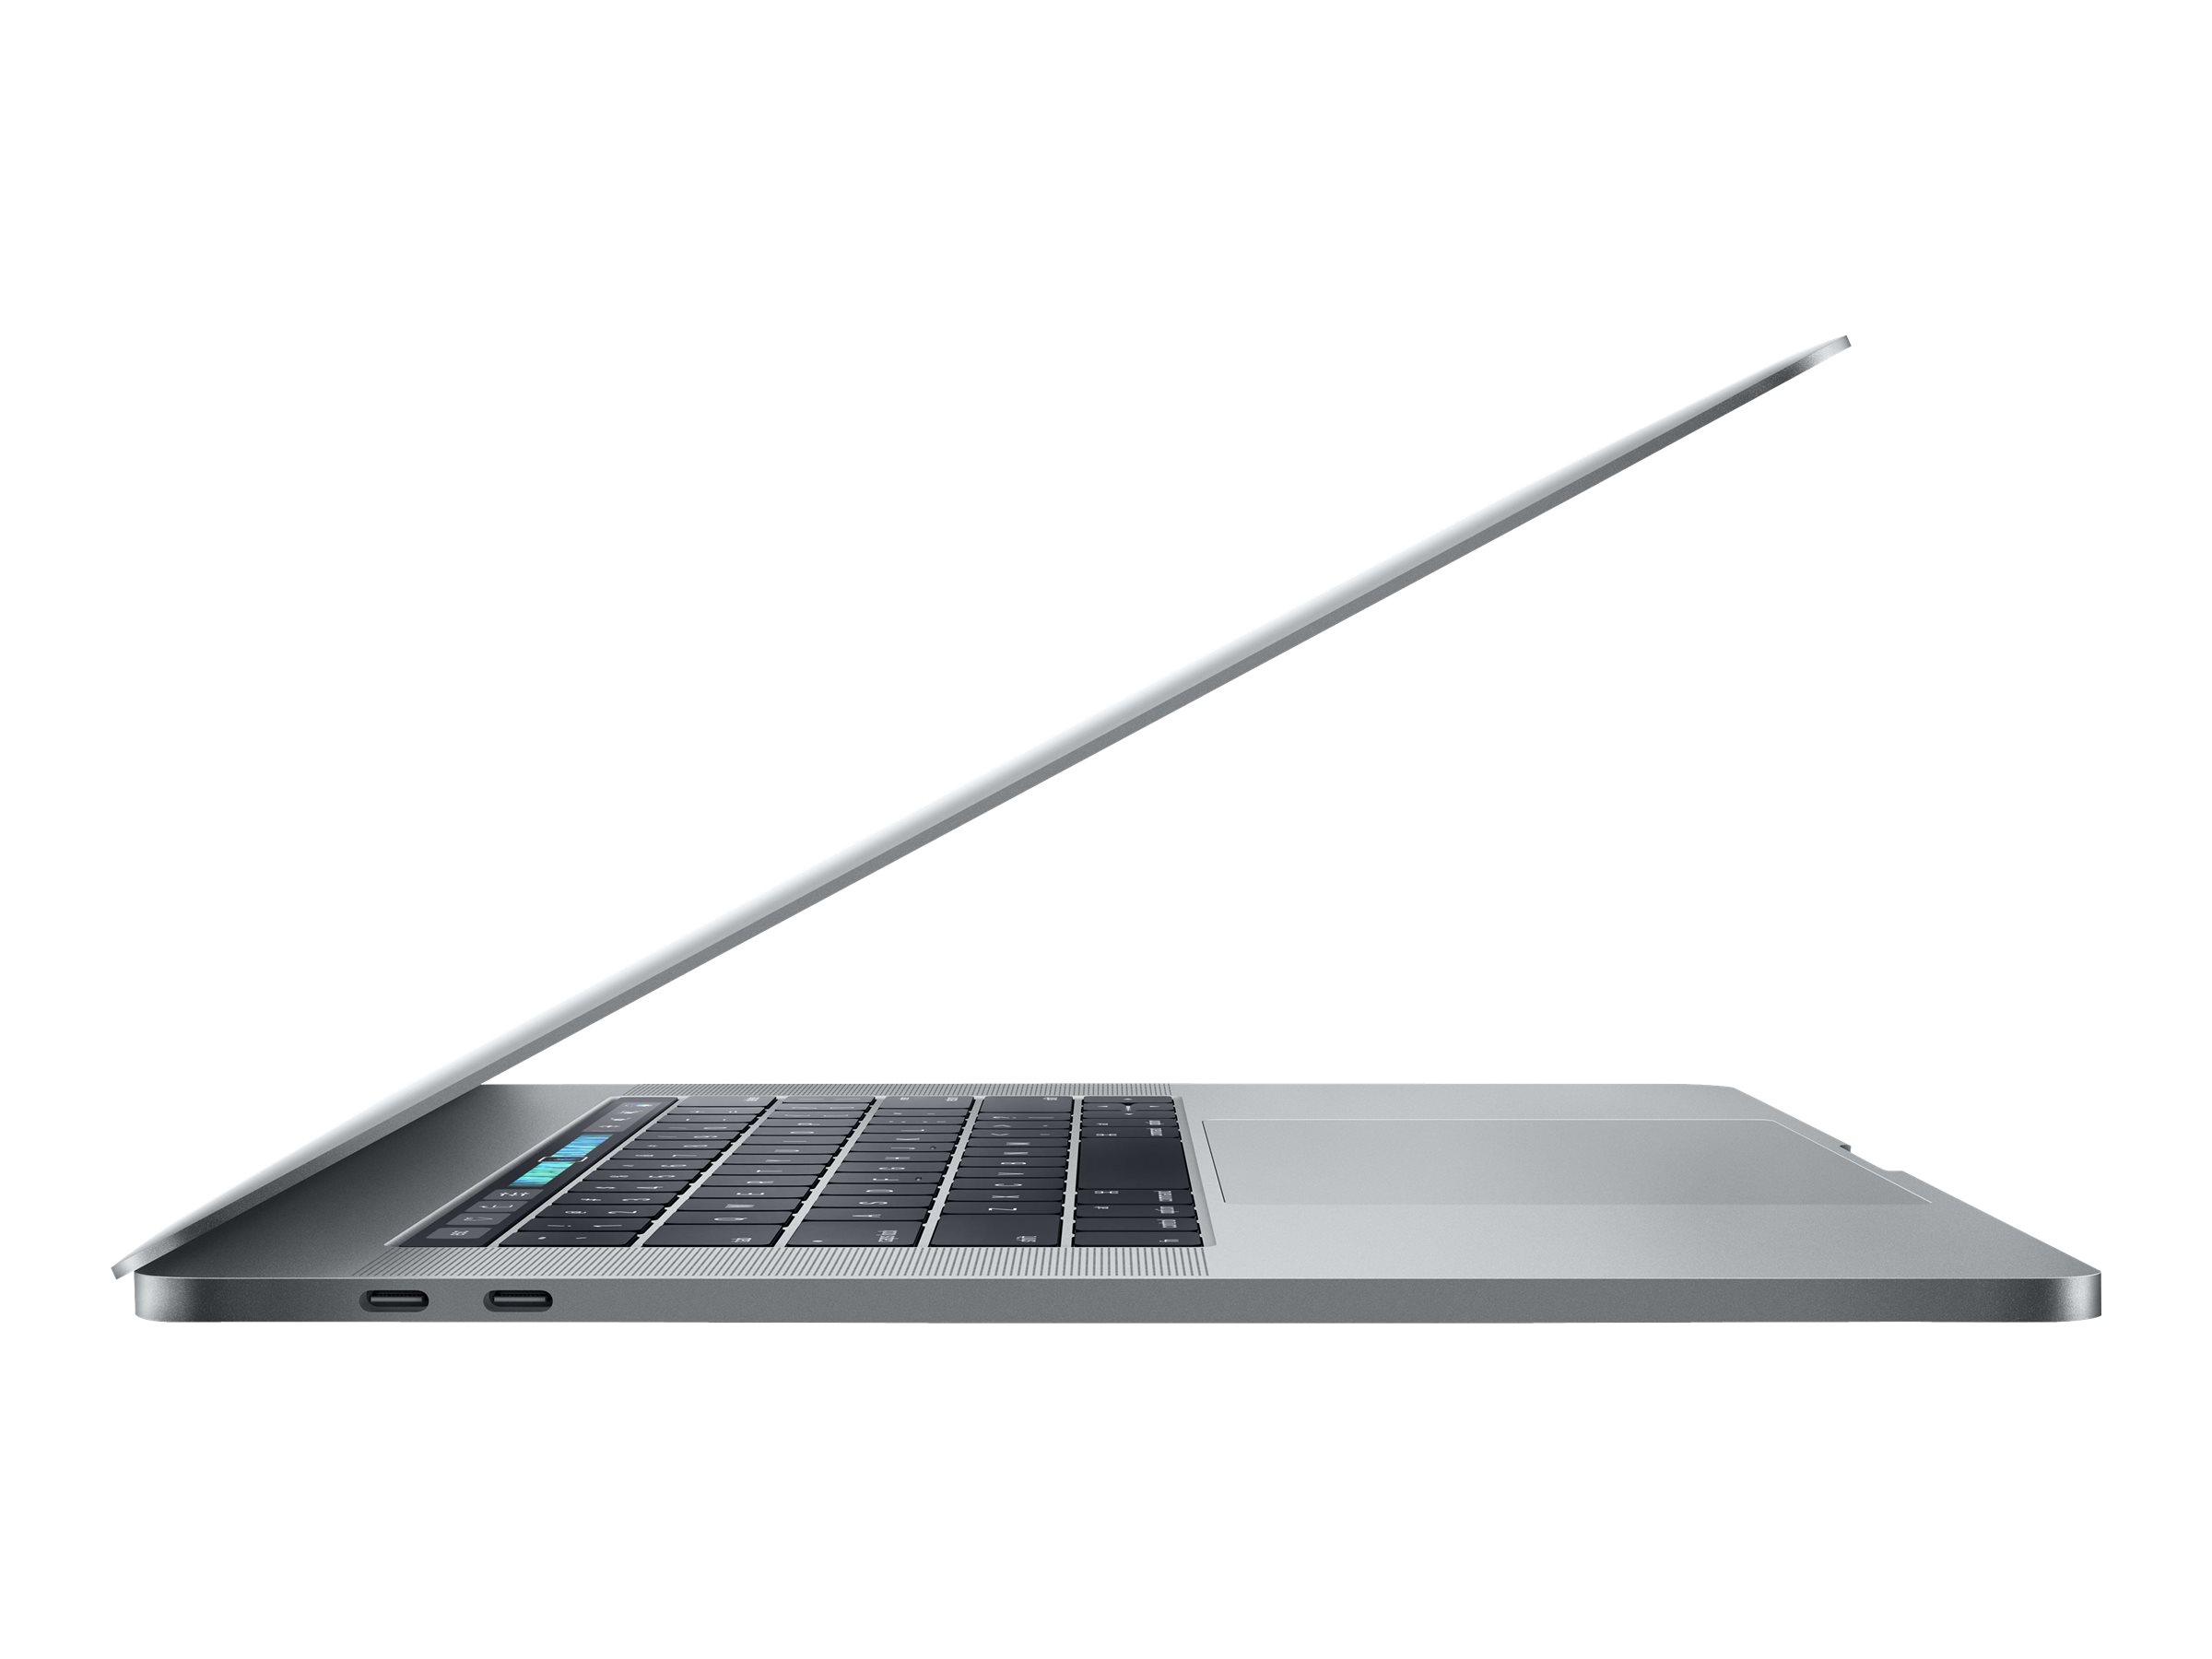 Apple MacBook Pro with Touch Bar | www.uk.shi.com